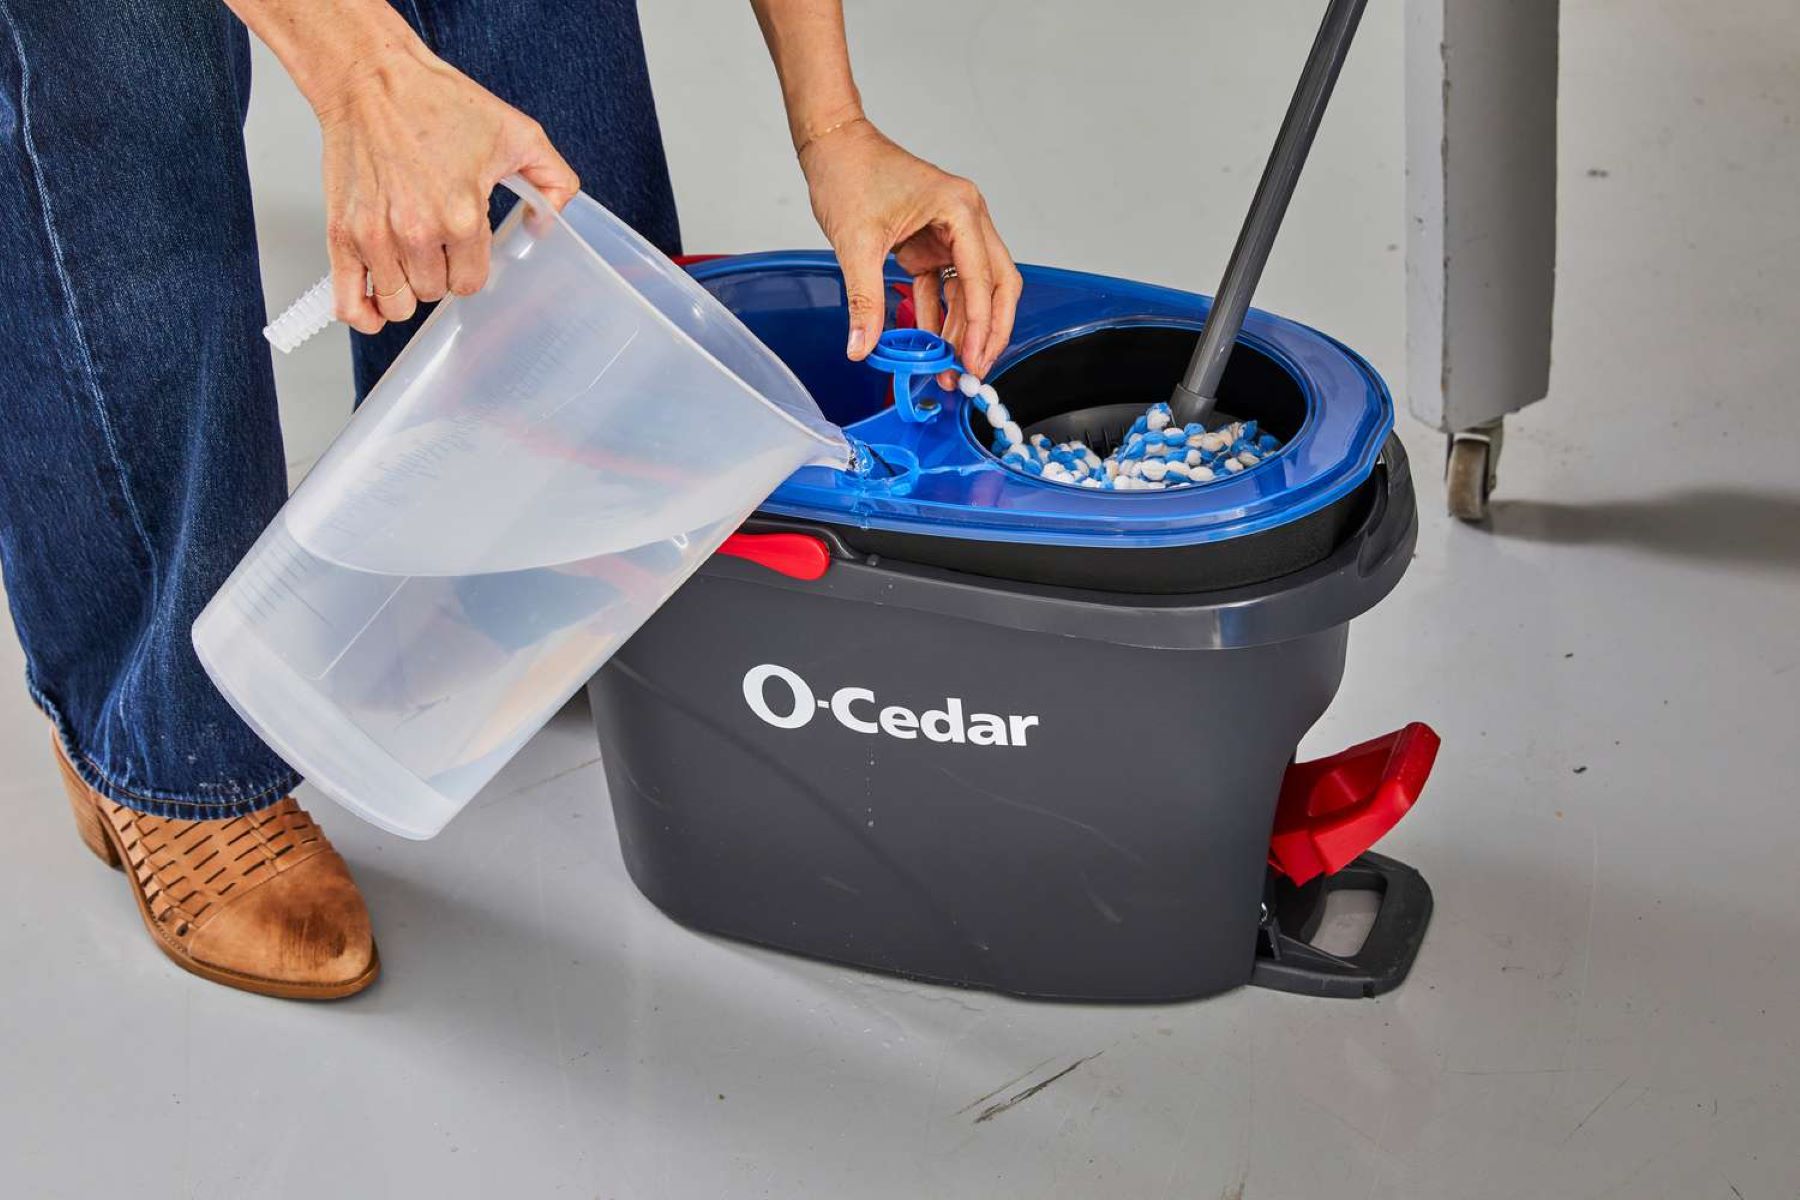 How To Use O-Cedar Clean Water Mop